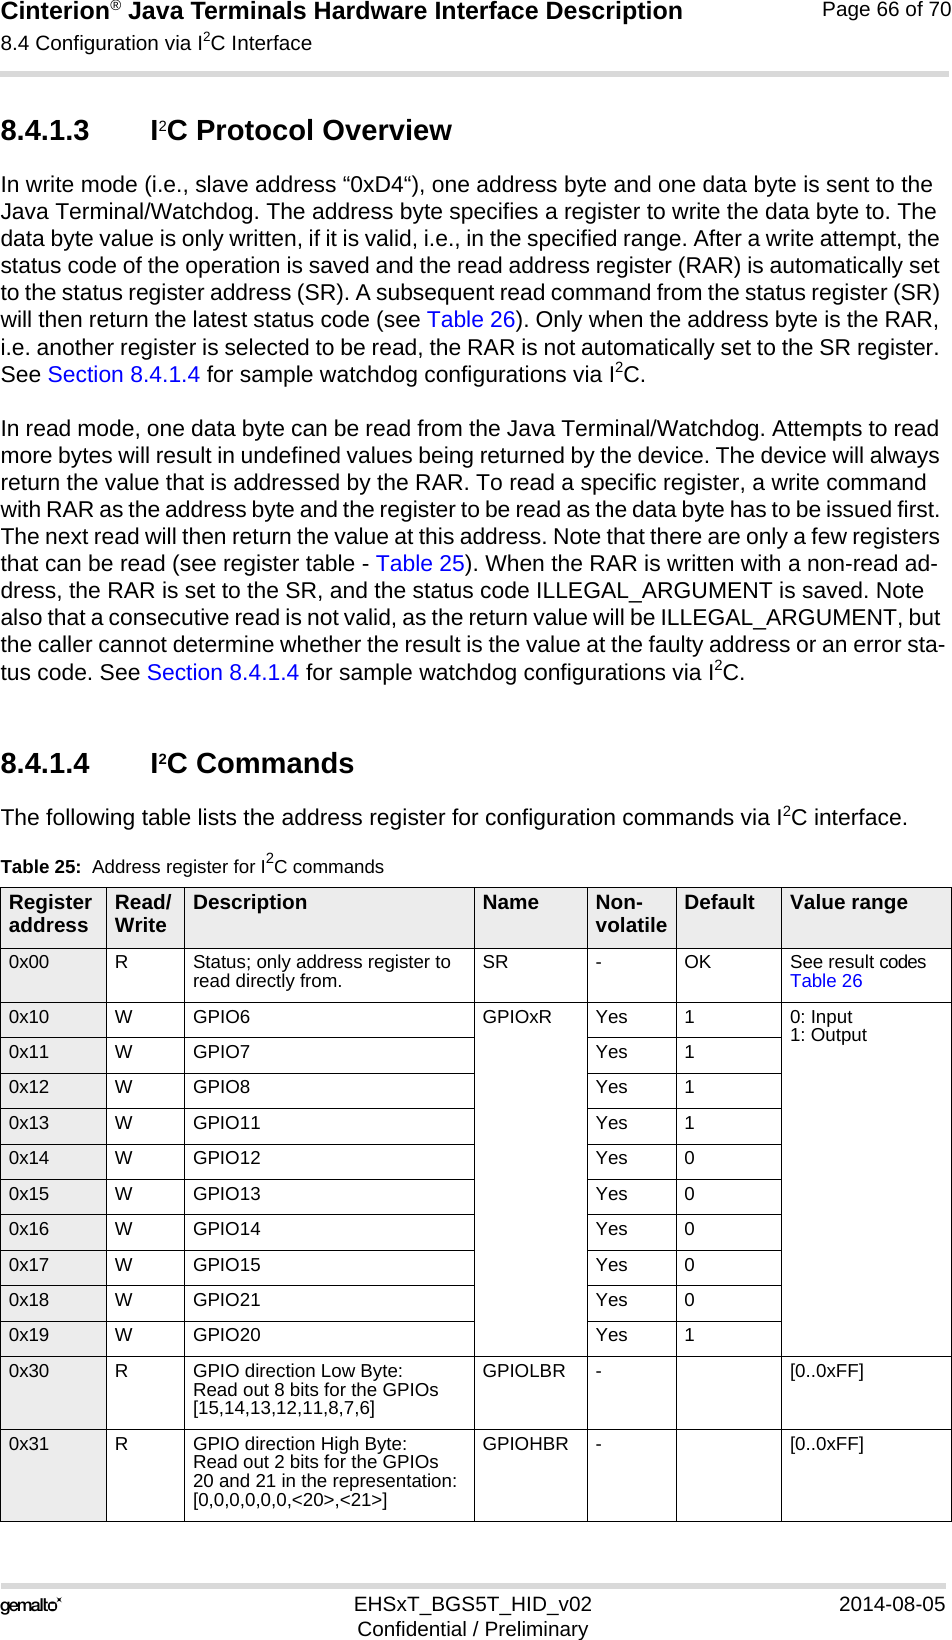 Cinterion® Java Terminals Hardware Interface Description8.4 Configuration via I2C Interface69EHSxT_BGS5T_HID_v02 2014-08-05Confidential / PreliminaryPage 66 of 708.4.1.3 I2C Protocol OverviewIn write mode (i.e., slave address “0xD4“), one address byte and one data byte is sent to the Java Terminal/Watchdog. The address byte specifies a register to write the data byte to. The data byte value is only written, if it is valid, i.e., in the specified range. After a write attempt, the status code of the operation is saved and the read address register (RAR) is automatically set to the status register address (SR). A subsequent read command from the status register (SR) will then return the latest status code (see Table 26). Only when the address byte is the RAR, i.e. another register is selected to be read, the RAR is not automatically set to the SR register. See Section 8.4.1.4 for sample watchdog configurations via I2C.In read mode, one data byte can be read from the Java Terminal/Watchdog. Attempts to read more bytes will result in undefined values being returned by the device. The device will always return the value that is addressed by the RAR. To read a specific register, a write command with RAR as the address byte and the register to be read as the data byte has to be issued first. The next read will then return the value at this address. Note that there are only a few registers that can be read (see register table - Table 25). When the RAR is written with a non-read ad-dress, the RAR is set to the SR, and the status code ILLEGAL_ARGUMENT is saved. Note also that a consecutive read is not valid, as the return value will be ILLEGAL_ARGUMENT, but the caller cannot determine whether the result is the value at the faulty address or an error sta-tus code. See Section 8.4.1.4 for sample watchdog configurations via I2C.8.4.1.4 I2C CommandsThe following table lists the address register for configuration commands via I2C interface.Table 25:  Address register for I2C commandsRegister address Read/Write Description Name Non-volatile Default Value range0x00 RStatus; only address register to read directly from. SR -OK See result codes Table 260x10 WGPIO6 GPIOxR Yes 10: Input1: Output0x11 WGPIO7 Yes 10x12 WGPIO8 Yes 10x13 WGPIO11 Yes 10x14 WGPIO12 Yes 00x15 WGPIO13 Yes 00x16 WGPIO14 Yes 00x17 WGPIO15 Yes 00x18 WGPIO21 Yes 00x19 WGPIO20 Yes 10x30 RGPIO direction Low Byte:Read out 8 bits for the GPIOs [15,14,13,12,11,8,7,6]GPIOLBR -[0..0xFF]0x31 RGPIO direction High Byte:Read out 2 bits for the GPIOs20 and 21 in the representation:[0,0,0,0,0,0,&lt;20&gt;,&lt;21&gt;]GPIOHBR -[0..0xFF]